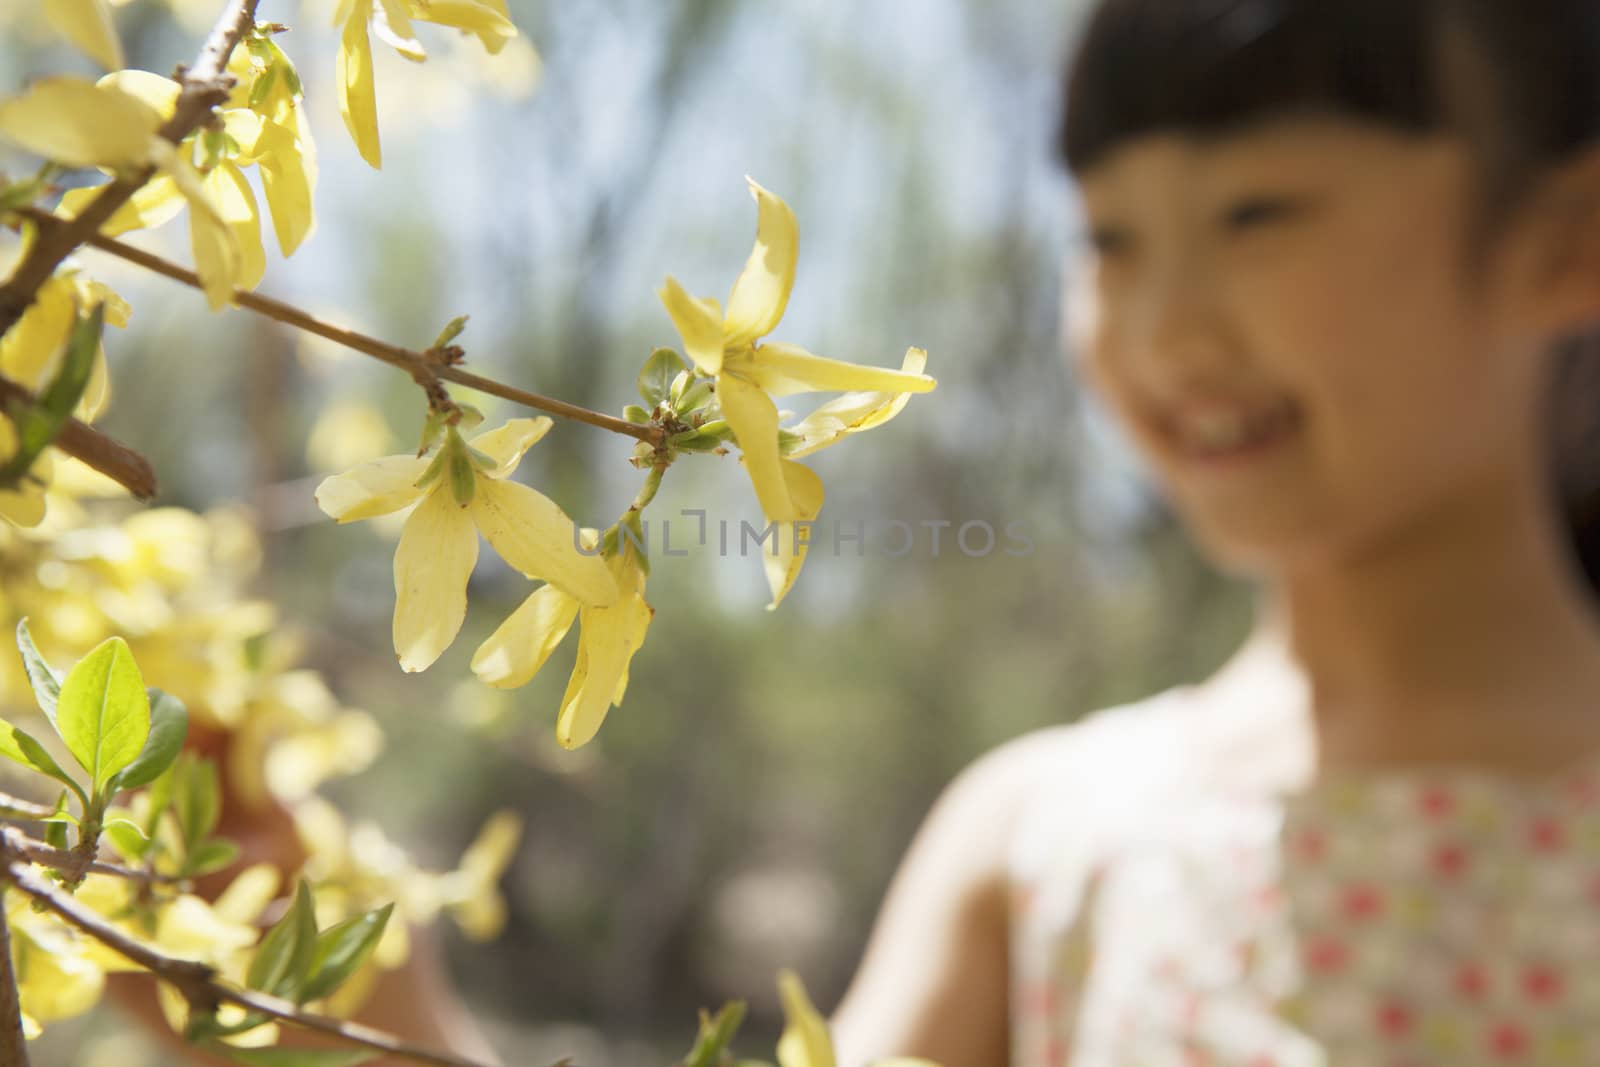 Smiling young girl looking at the yellow blossoms on the tree in the park in springtime